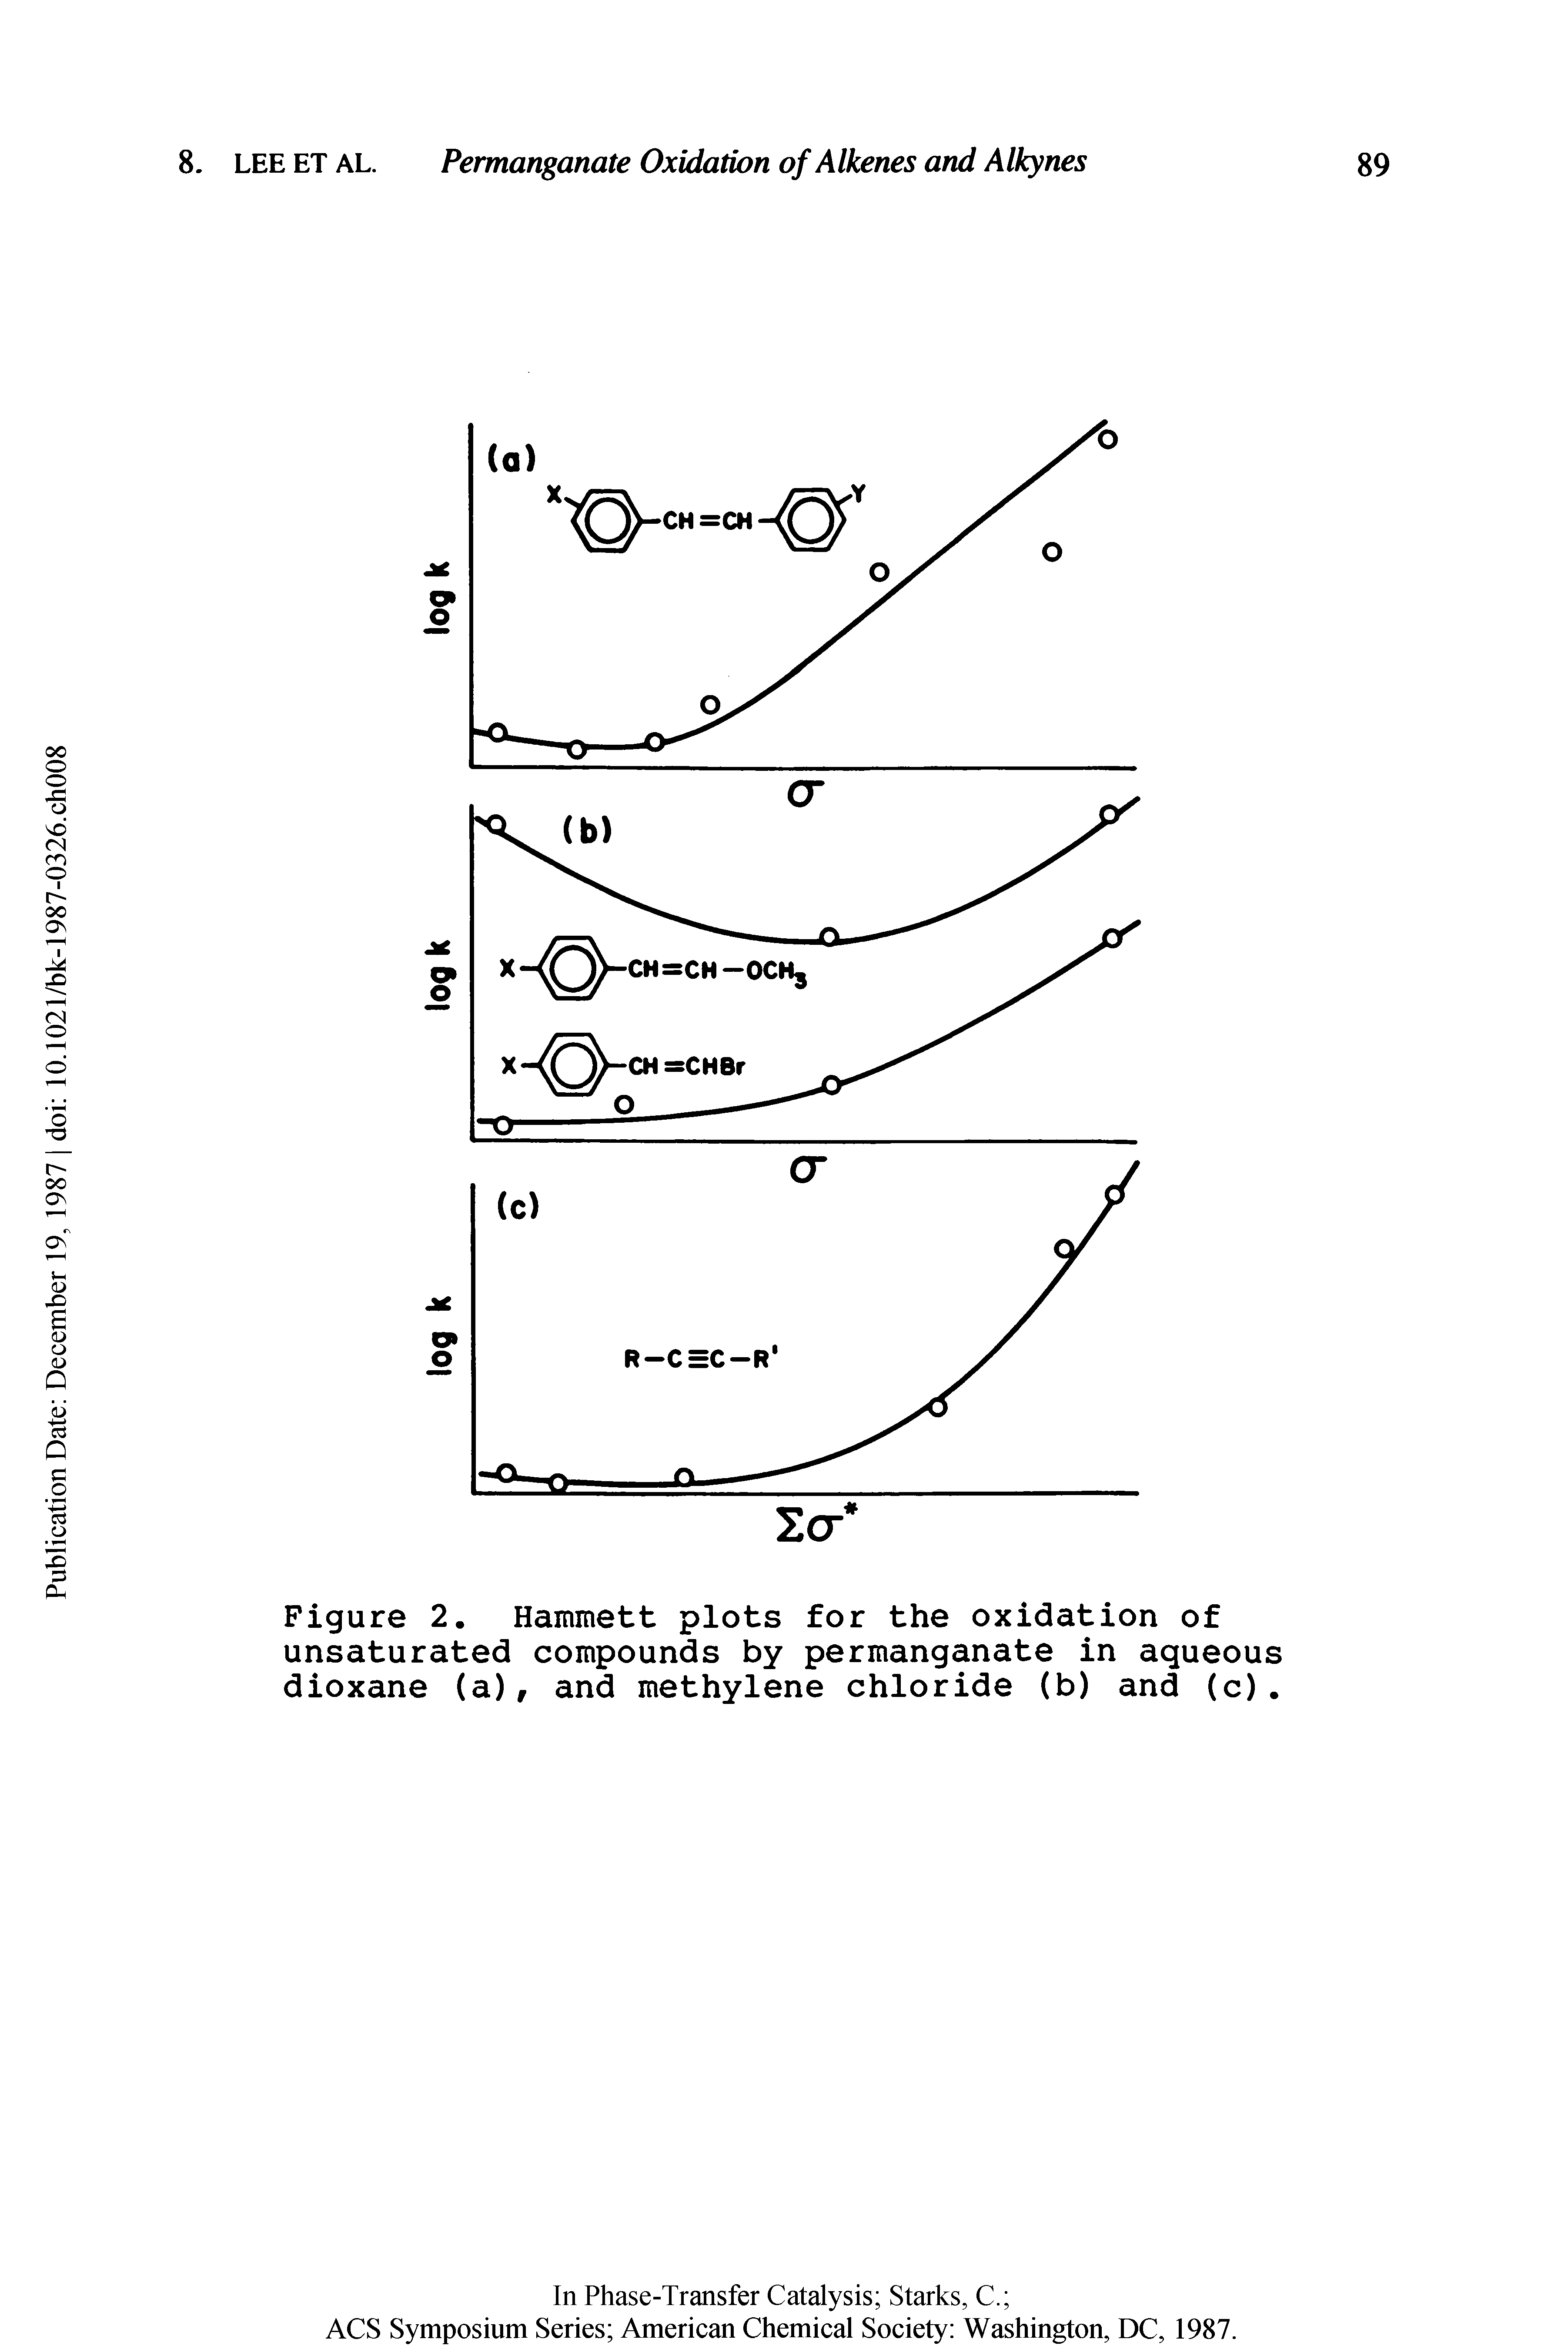 Figure 2. Hammett plots for the oxidation of unsaturated compounds by permanganate in aqueous dioxane (a), and methylene chloride (b) and (c).